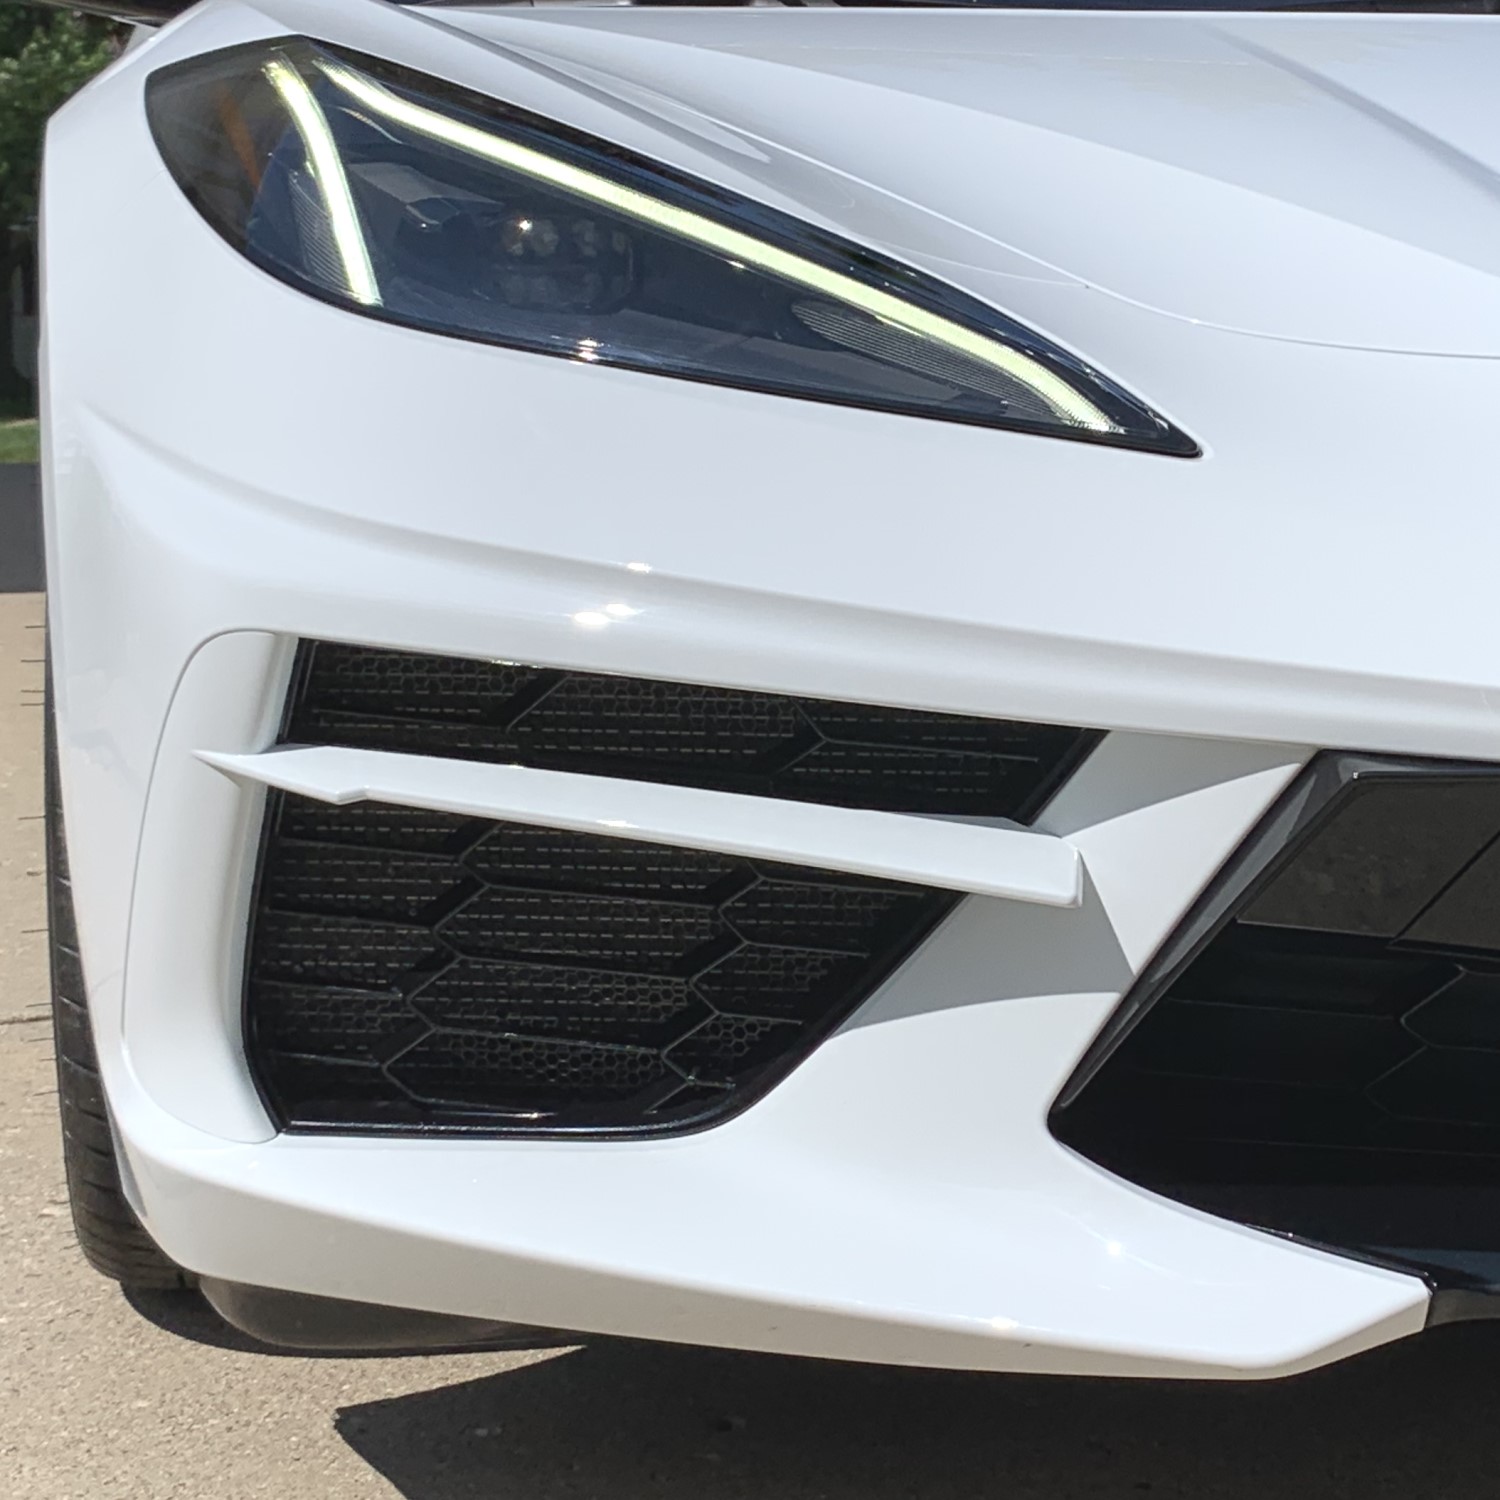 New Grille Mesh Product for 2020 C8 Corvette: Protection Meets Style